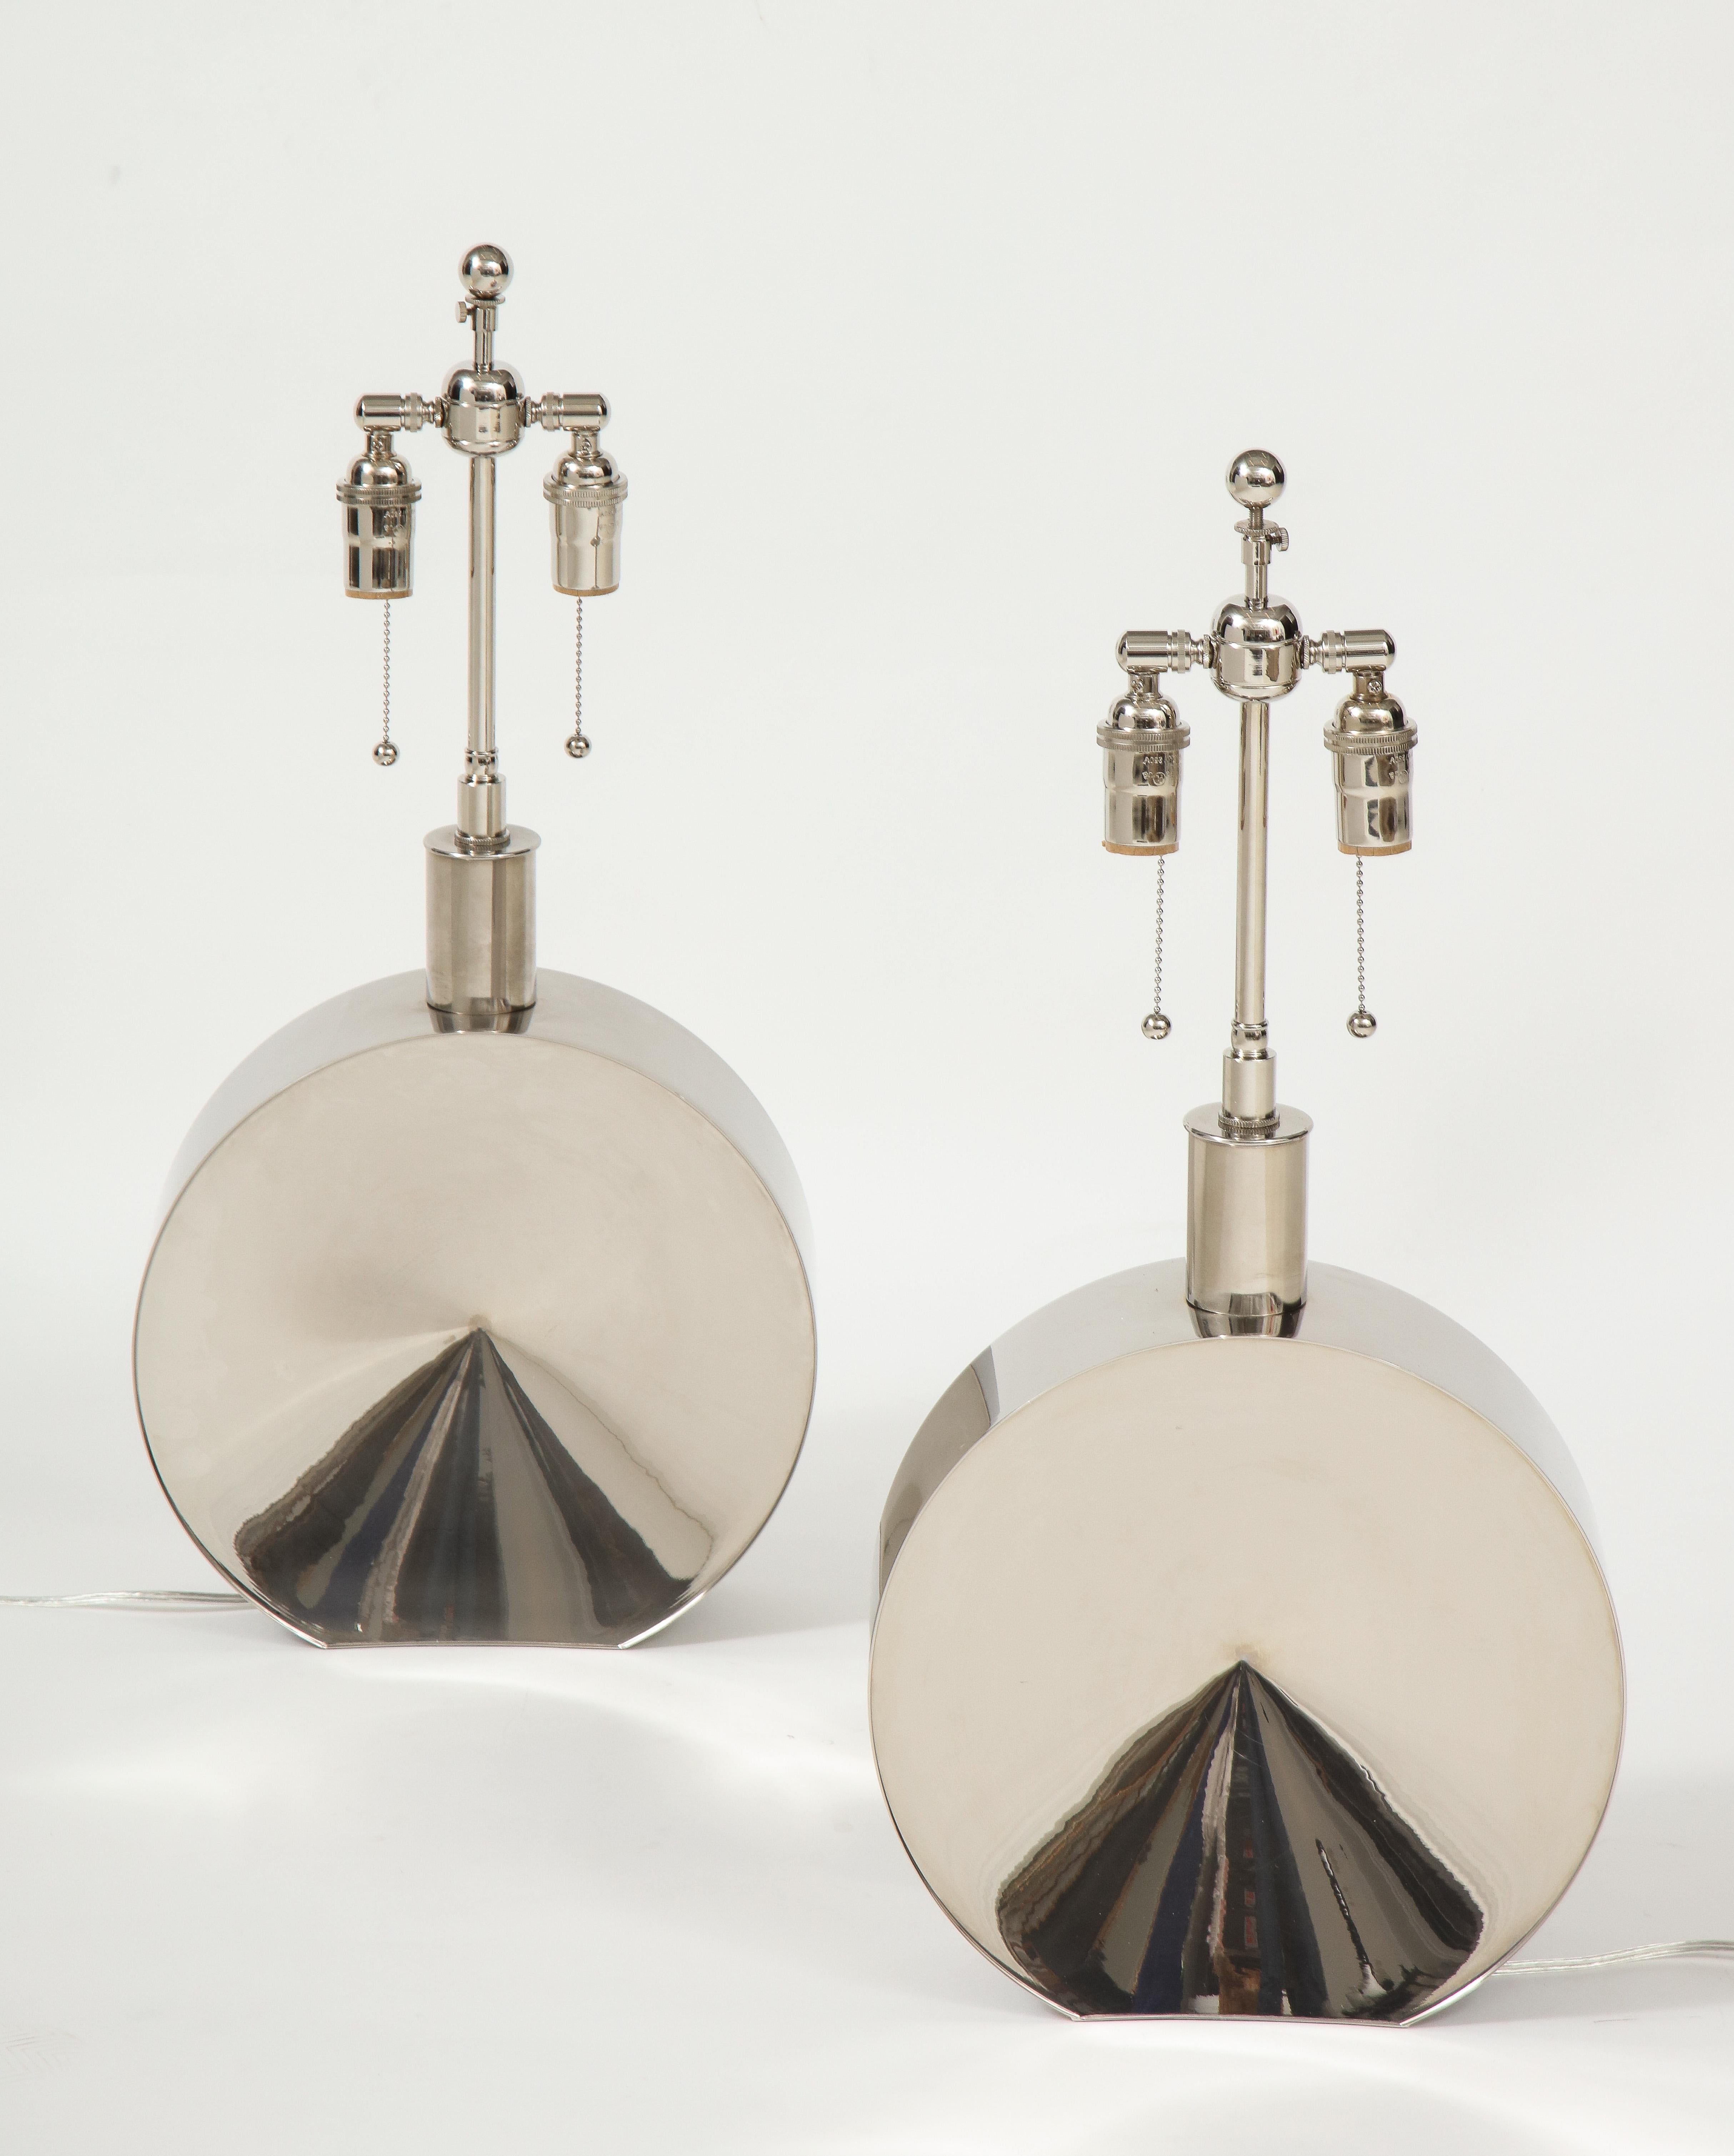 Pair of stunning chrome lamps acquired directly from a Steve Chase interior.
The beautifully constructed chrome lamp bodies have a slight convex design shape to them 
and they have been newly rewired with polished chrome adjustable double